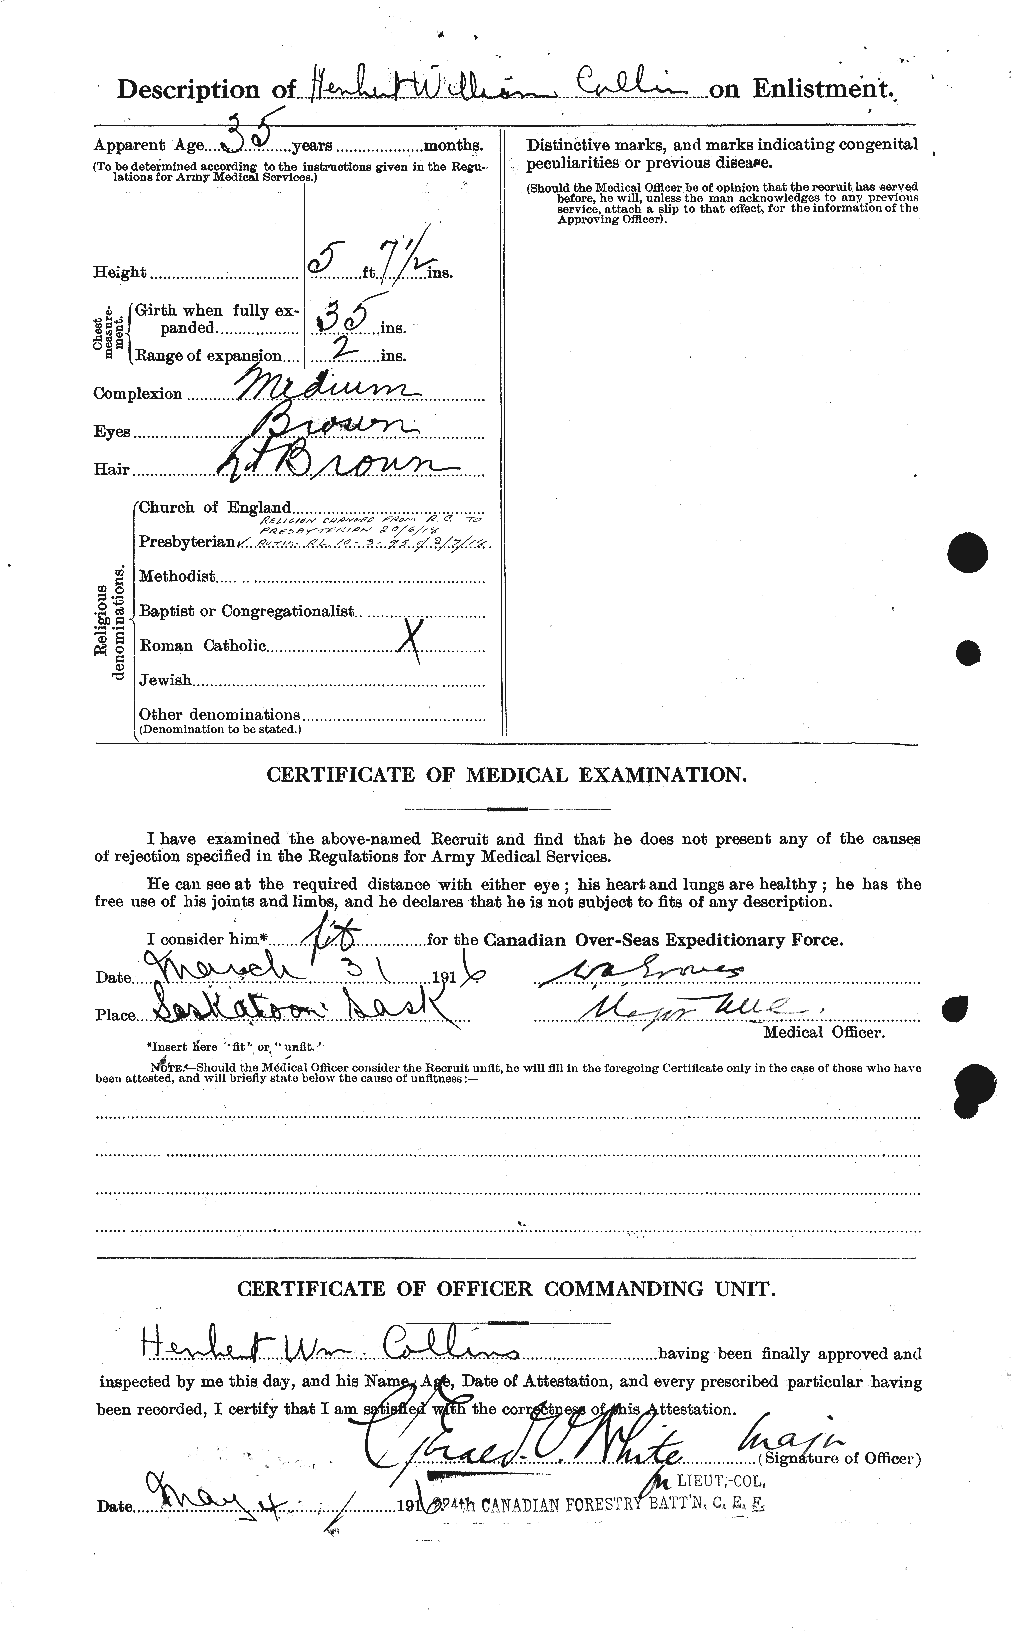 Personnel Records of the First World War - CEF 069997b